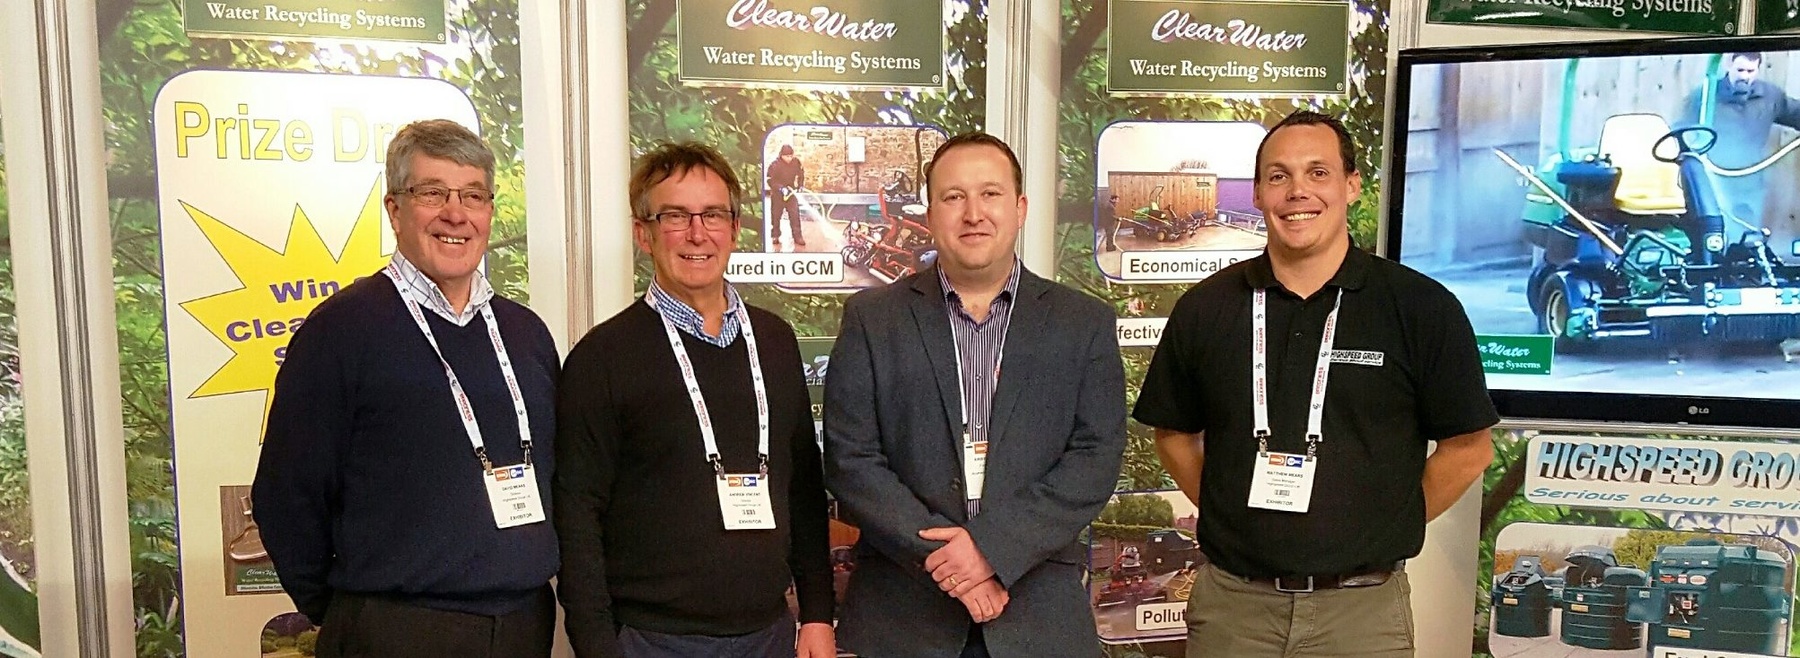 Acumen’s Kris Sutton (2nd from right) with the Highspeed Team(L to R David Mears Andy Vincent Matthew Mears) at BTME 2017 (002)